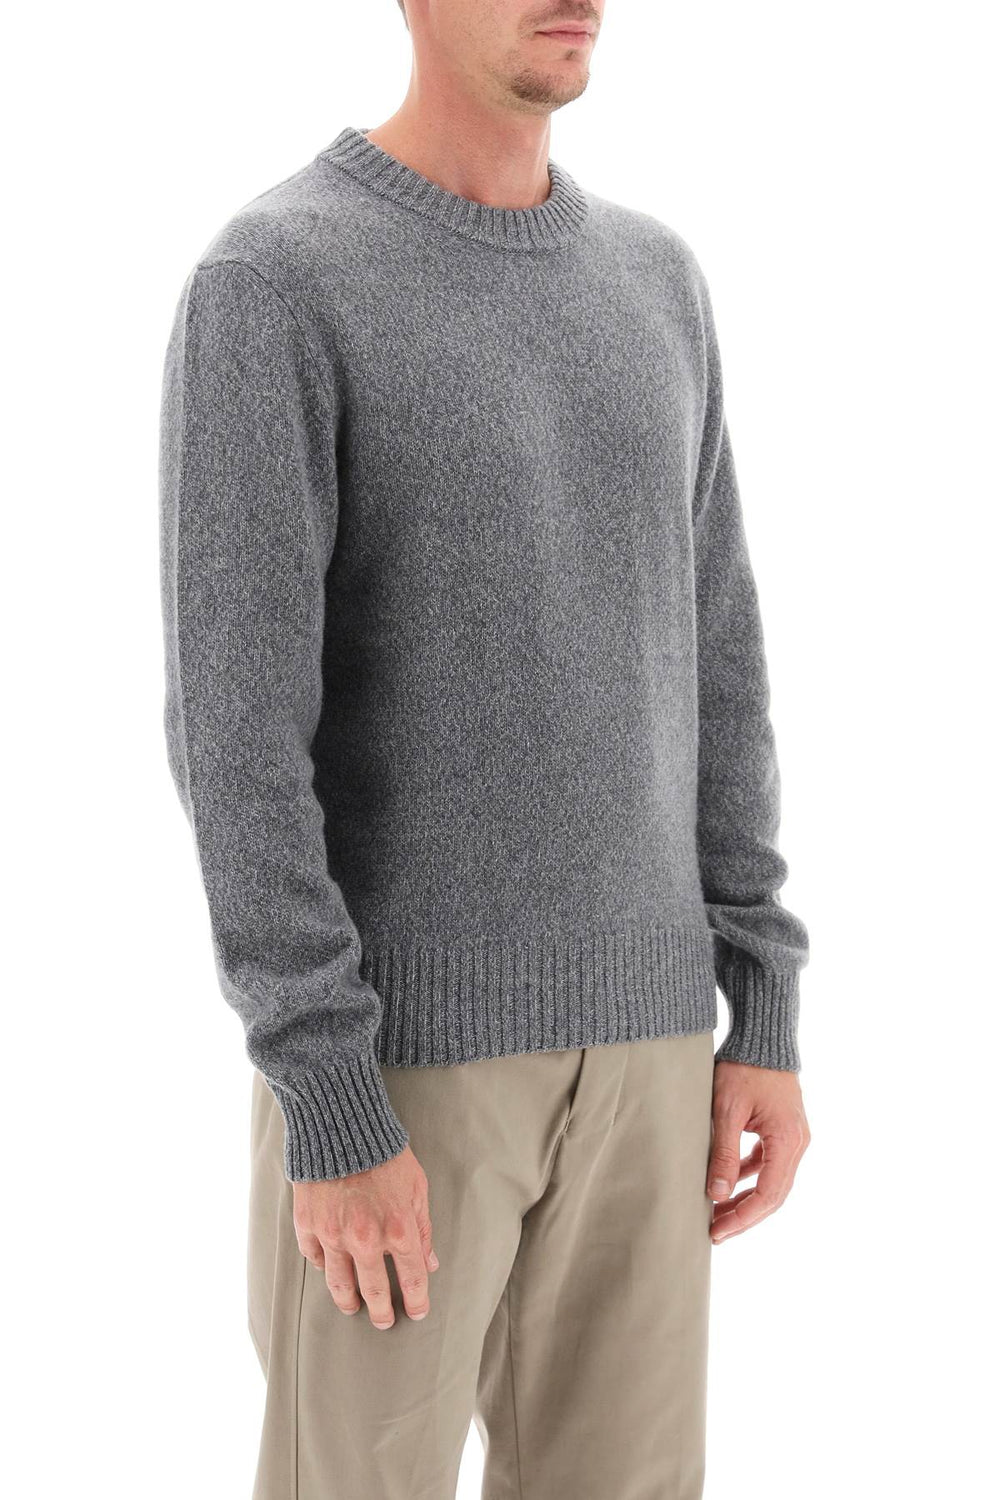 Ami paris cashmere and wool sweater-1